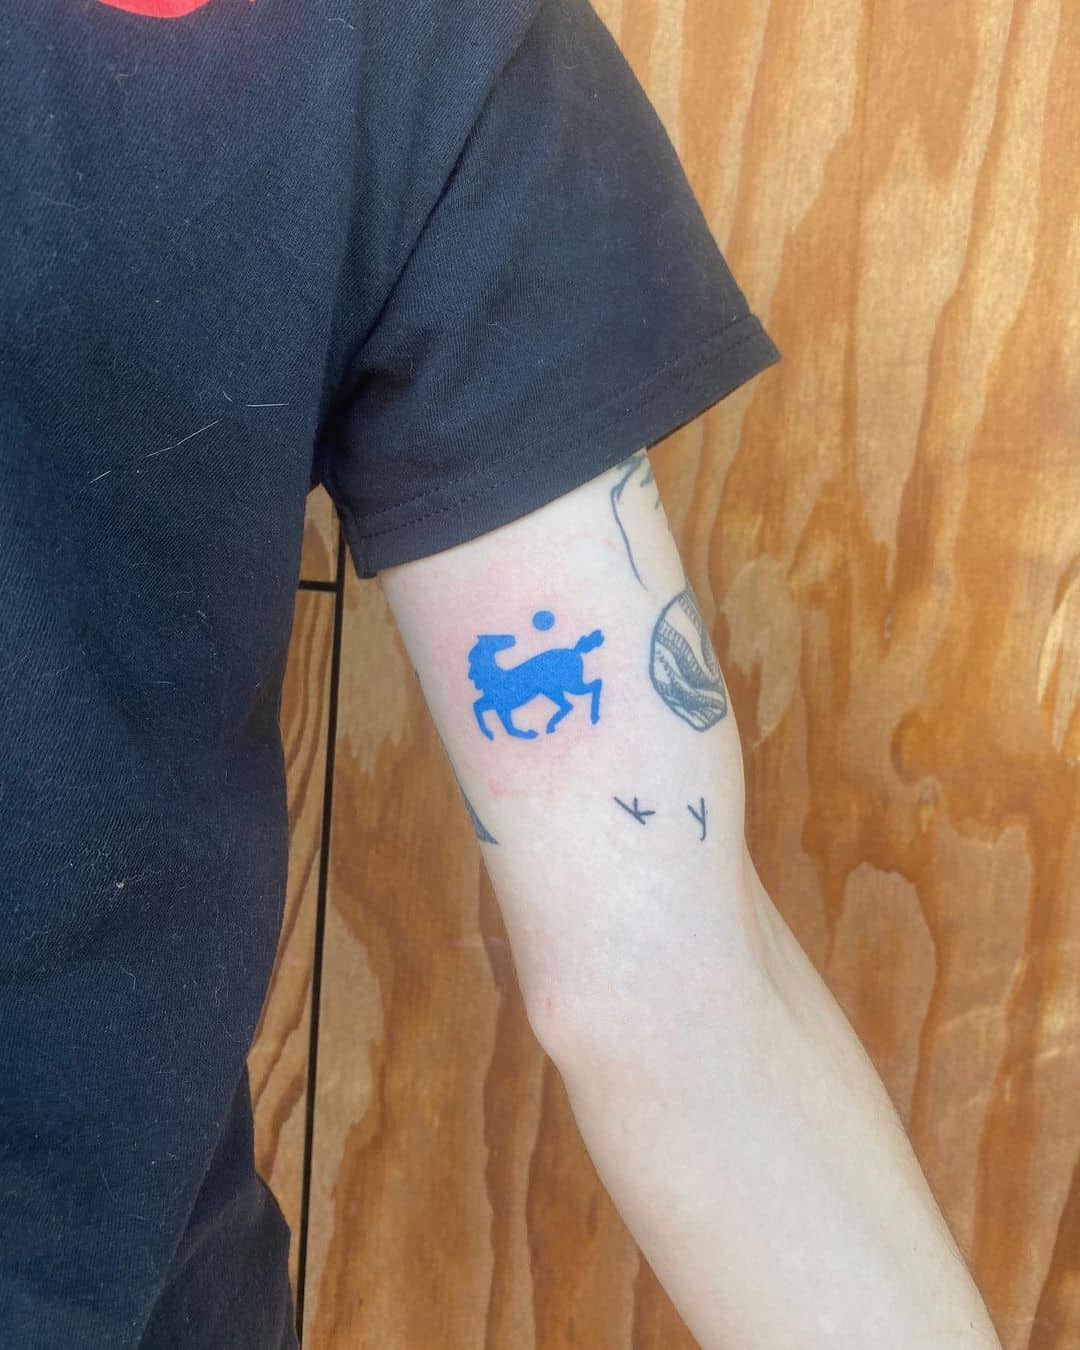 Small blue horse tattoo by blue.child